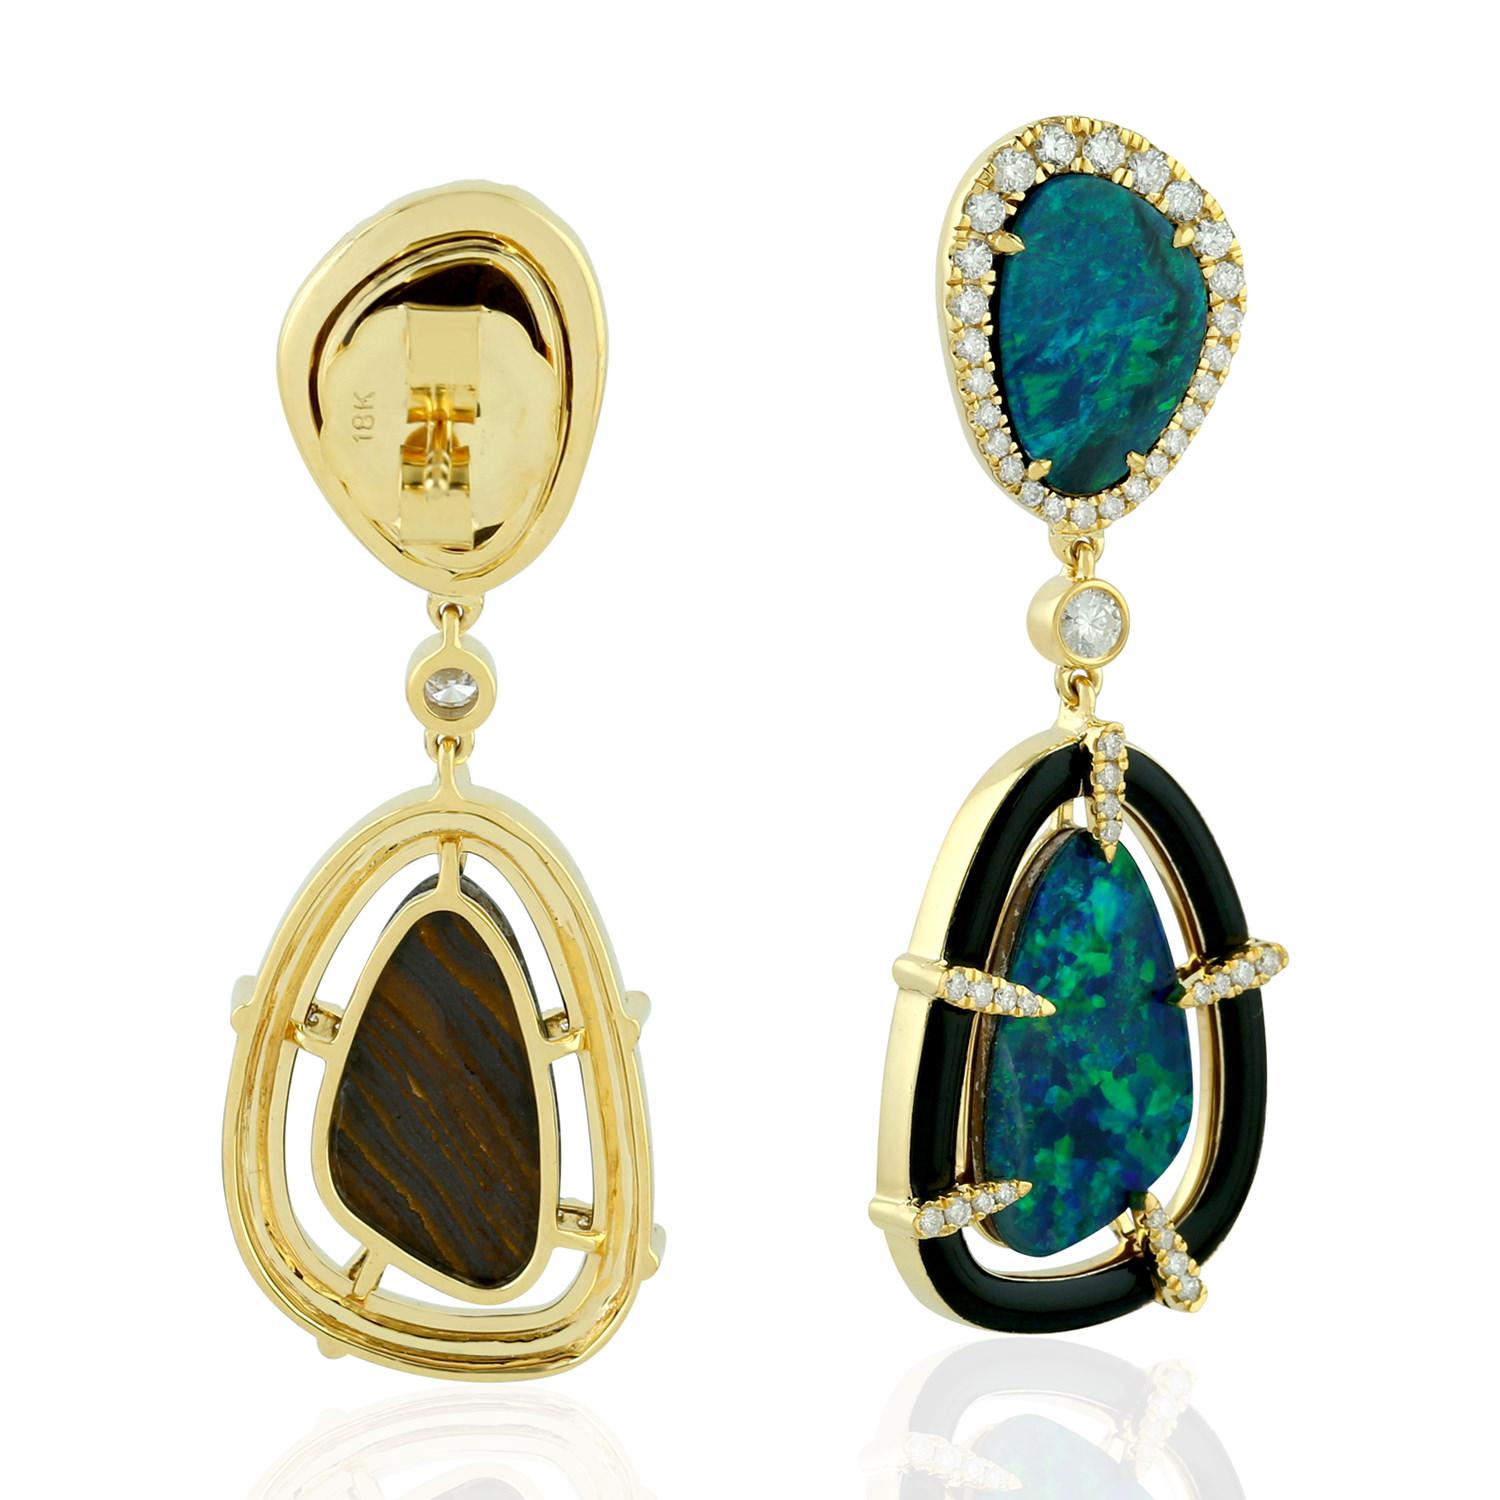 Contemporary 8.98 ct Opal Dangle Earrings With Black Enamel & Diamonds In 18k Yellow Gold For Sale